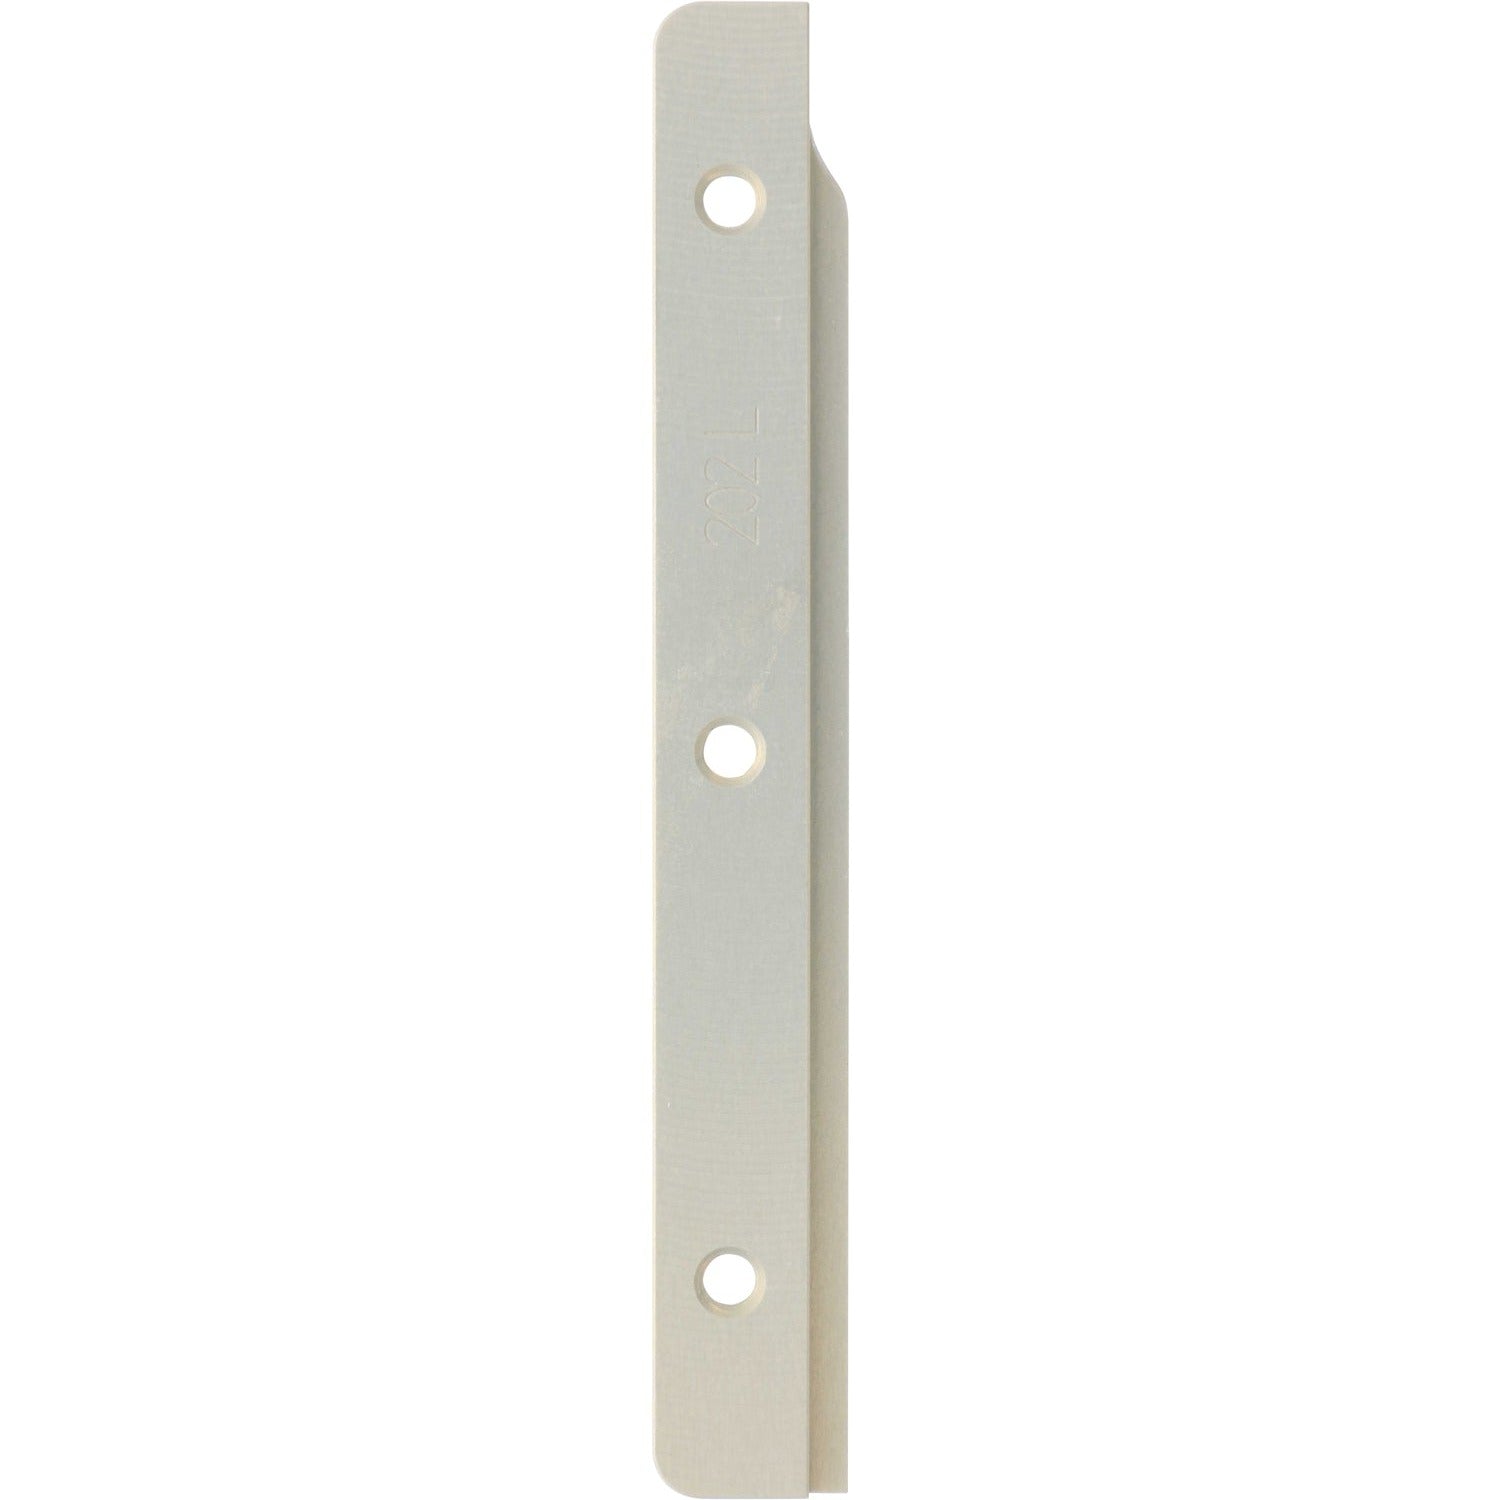 Machined blade like part made of hard anodized aluminum on white background. The part has three threaded holes and 202L machined onto it&